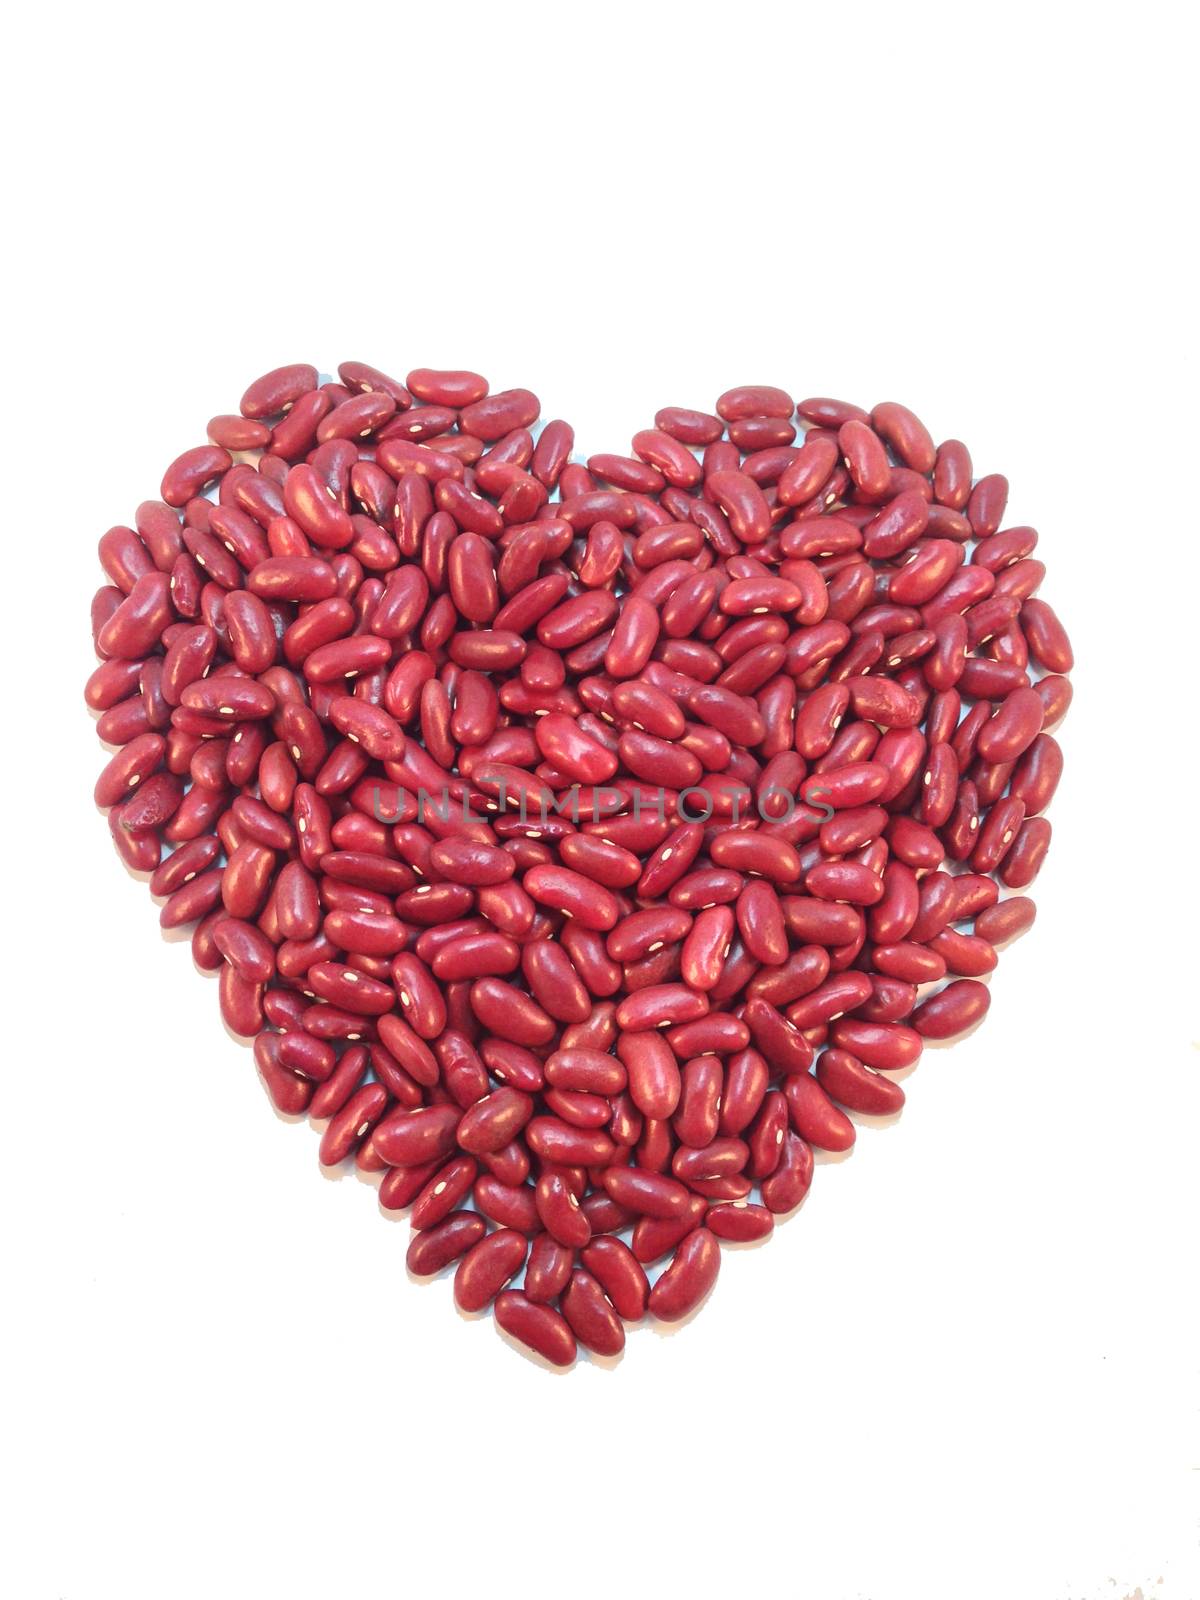 Heart shaped red bean on white background